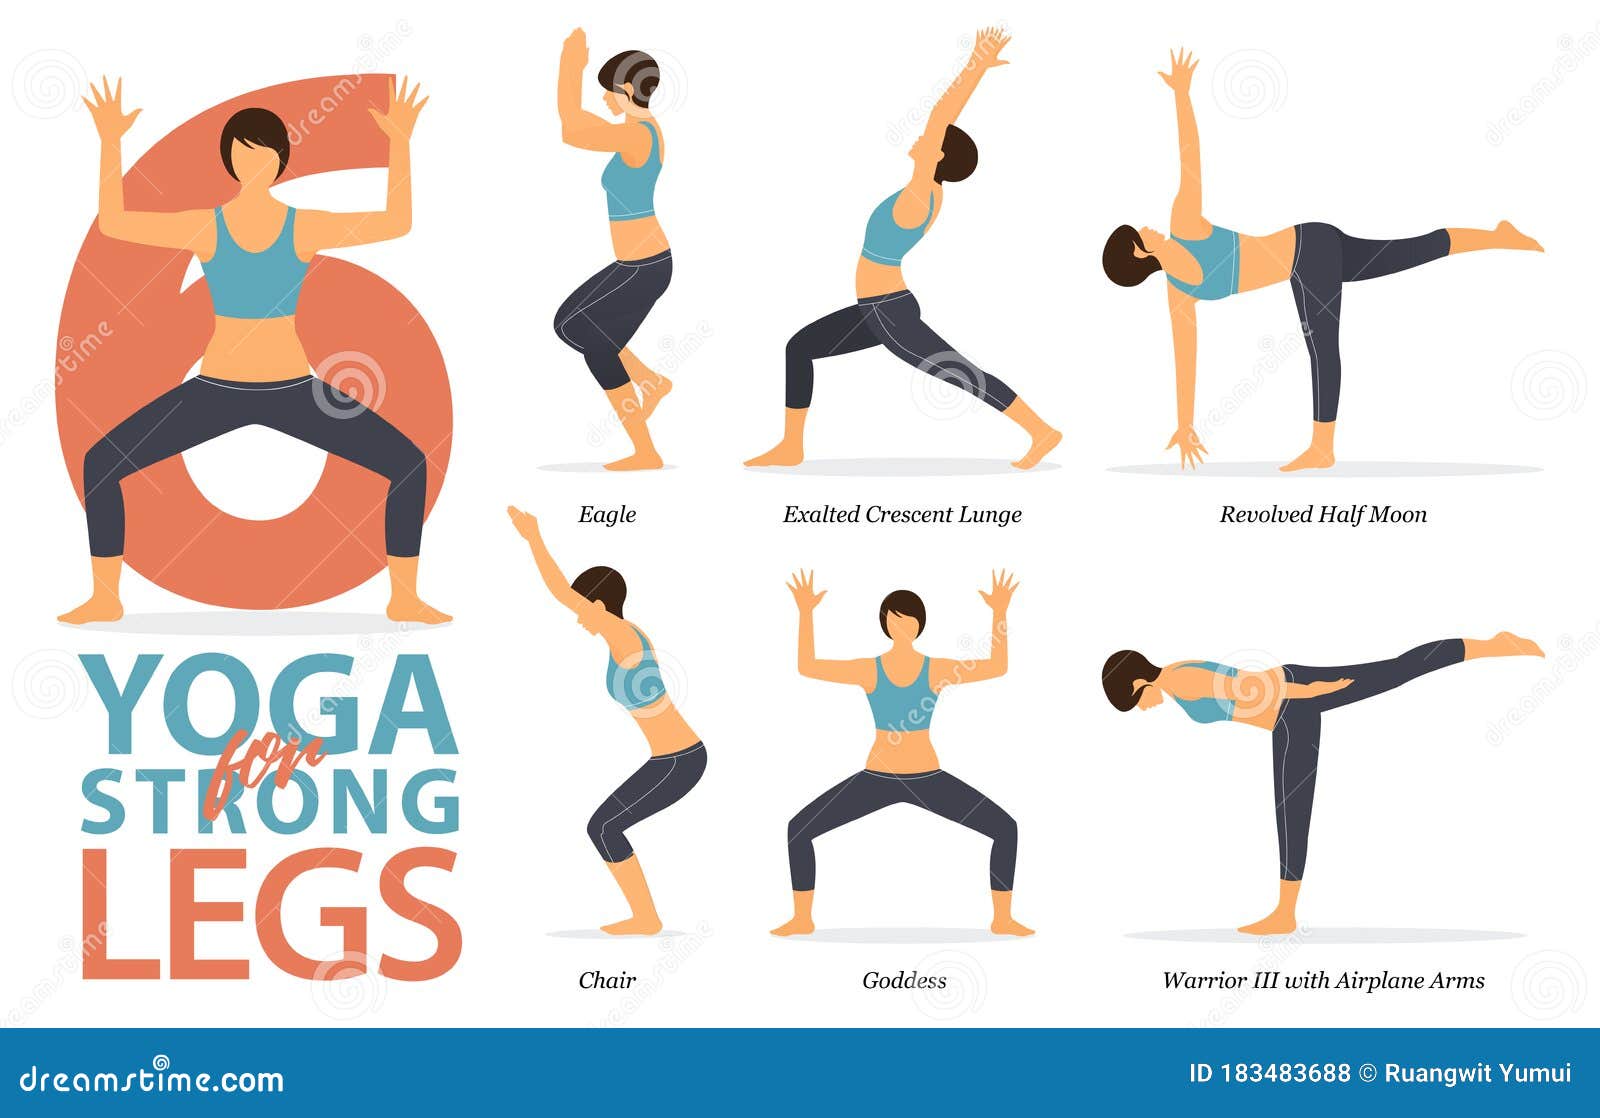 Yoga Sequence for Legs — YOGABYCANDACE